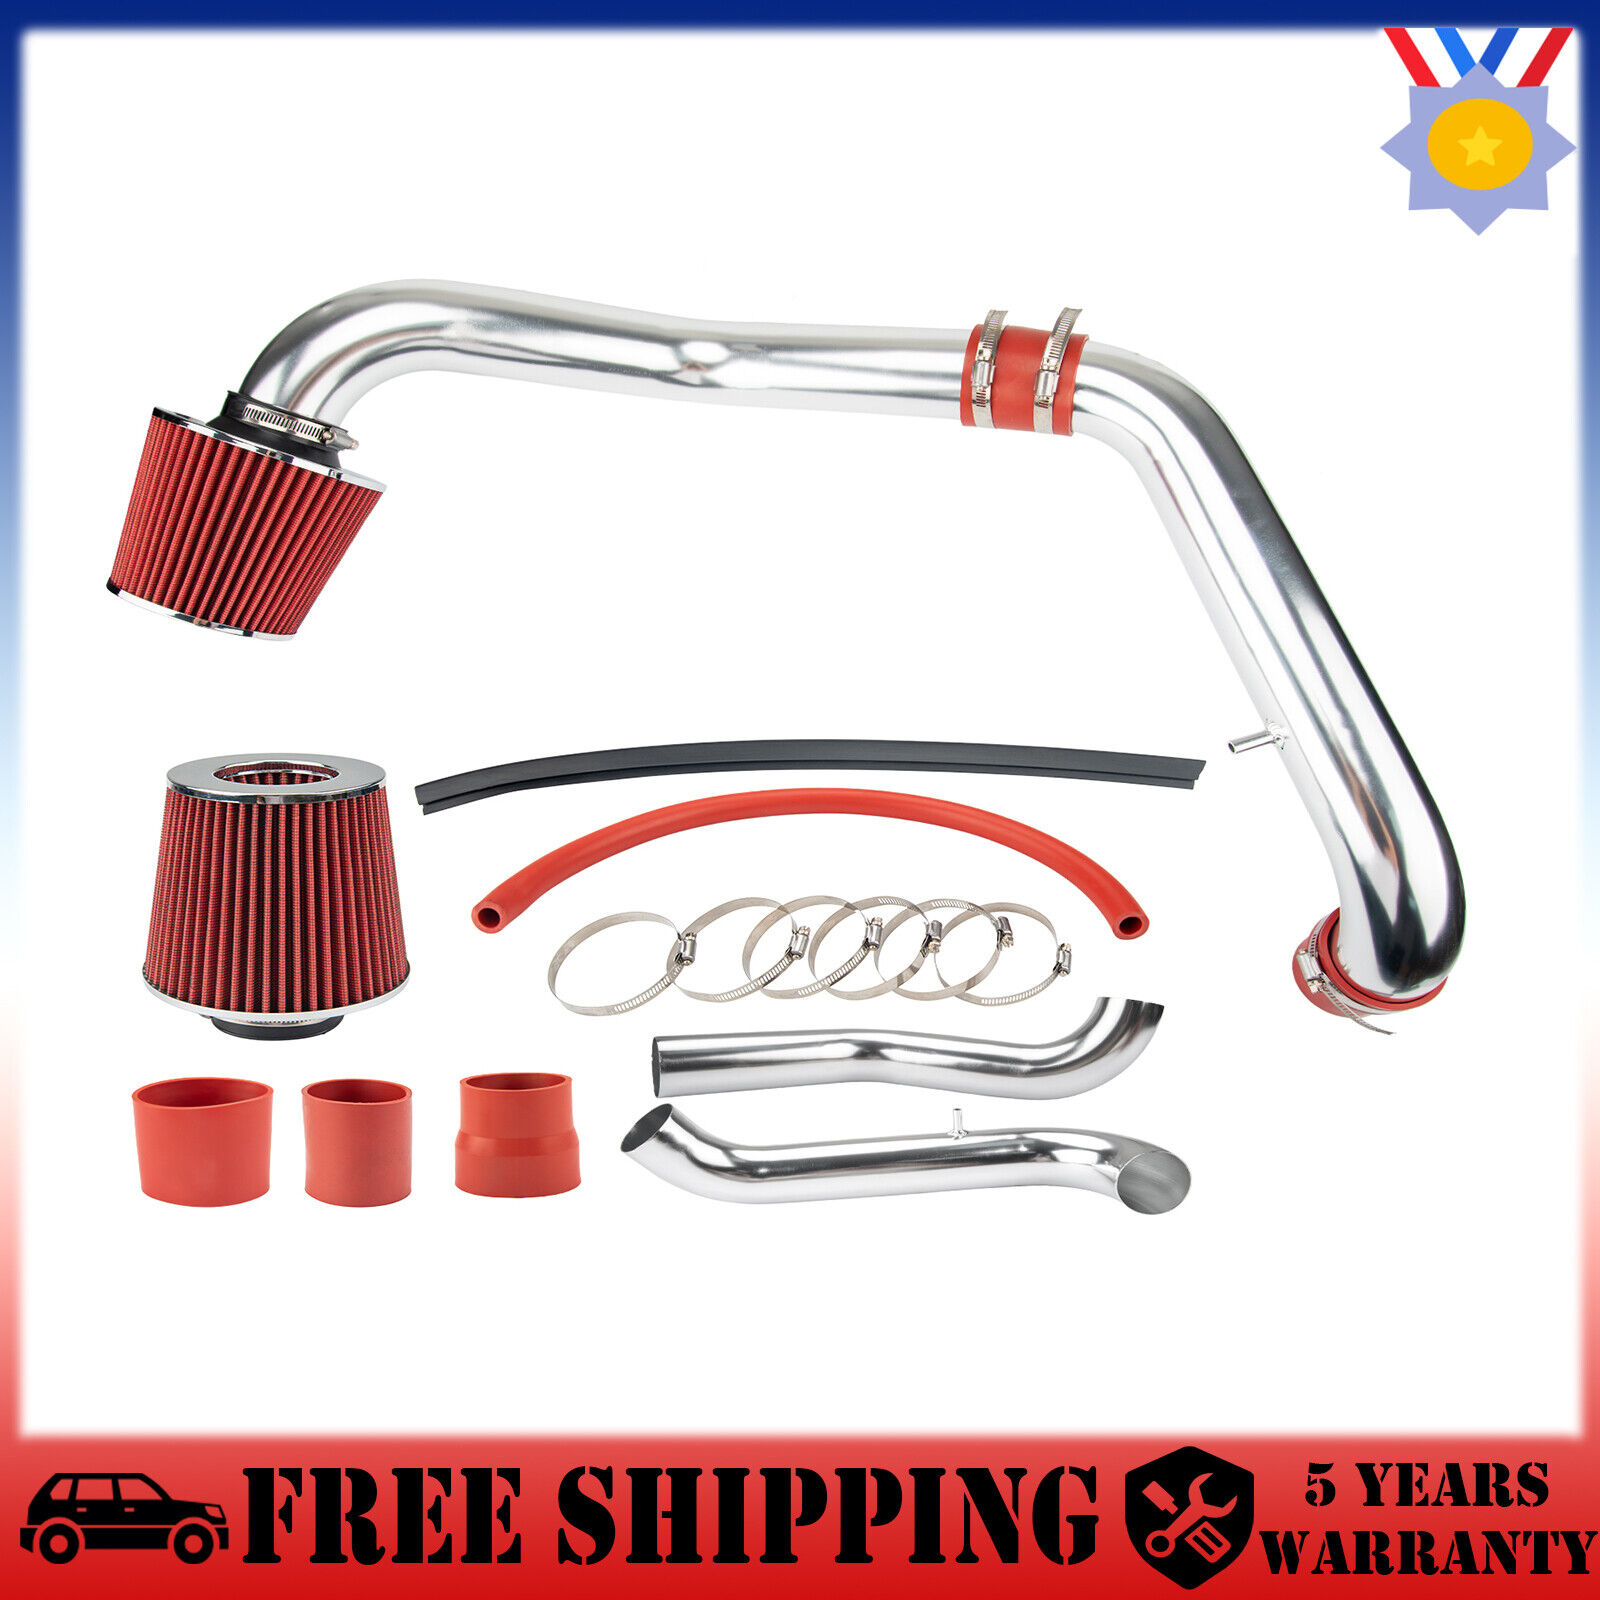 Red Cold Air Intake Kit Filter For Honda Civic CX DX LX 1996-2000 1.6L Aluminum